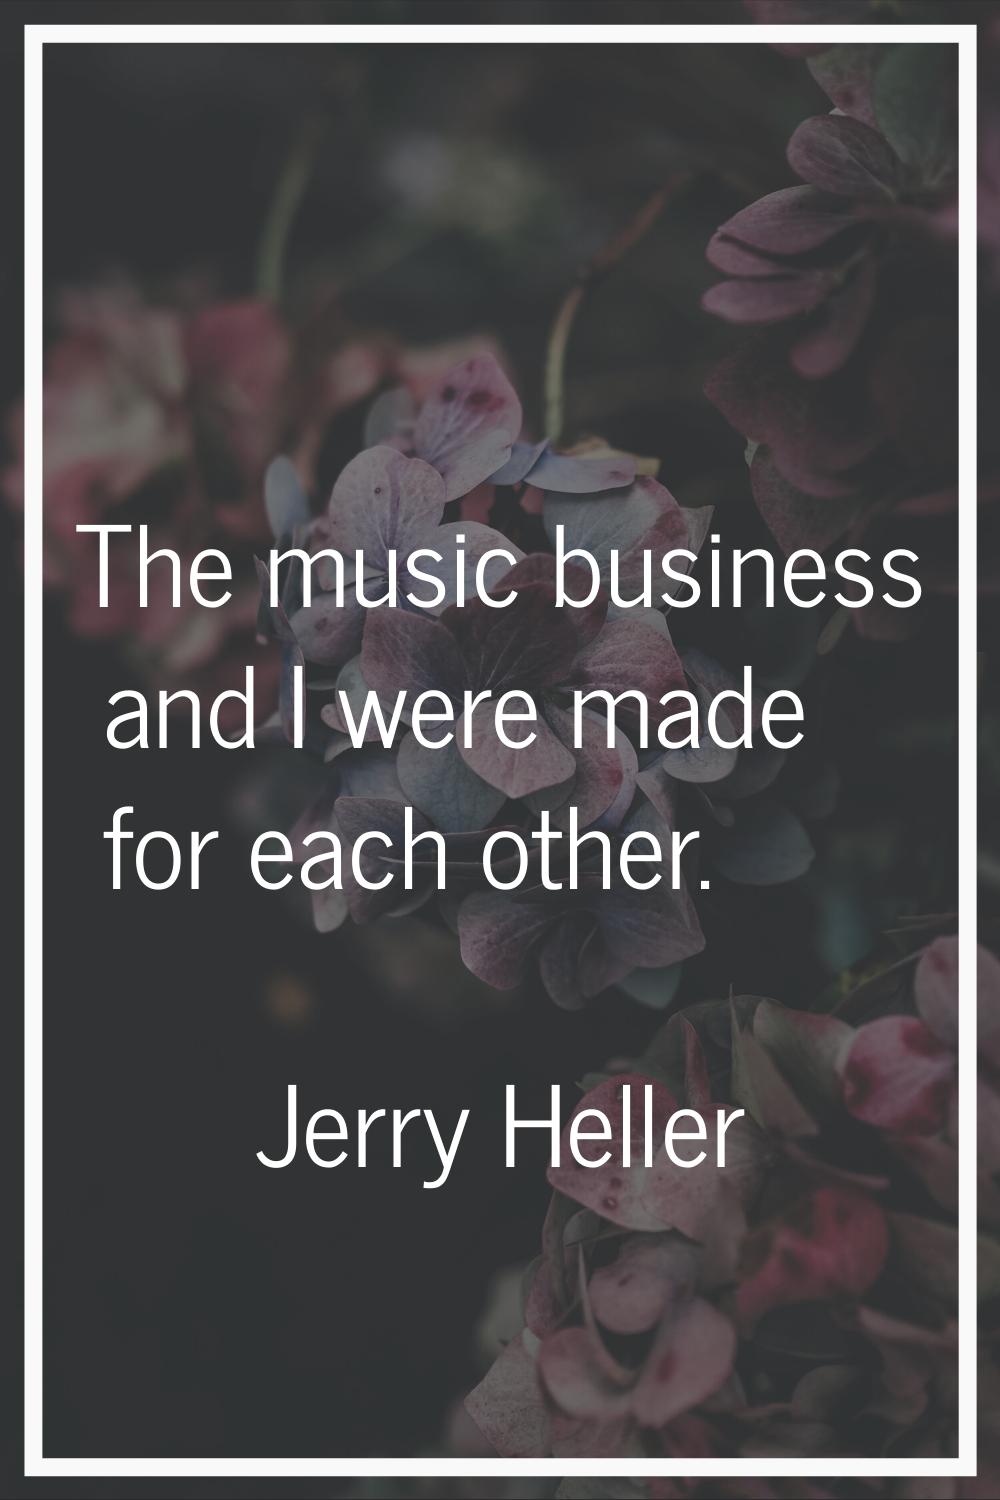 The music business and I were made for each other.